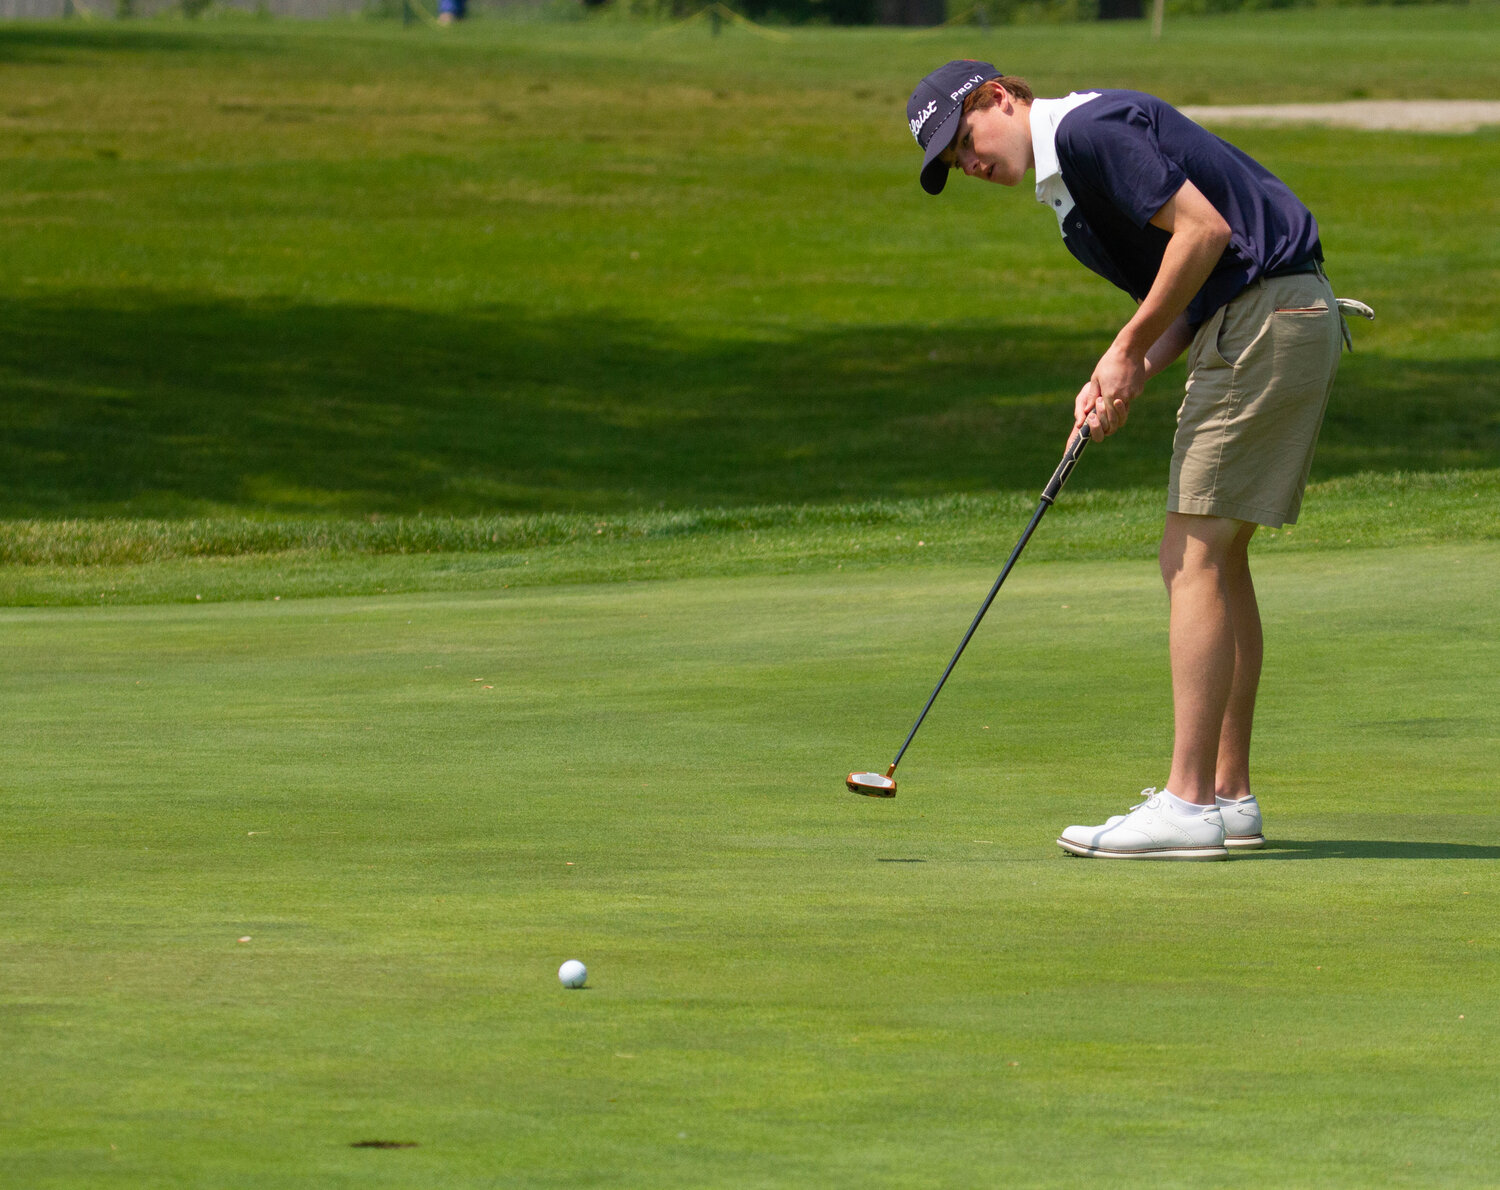 Barrington High School’s Adam Gorman hits a putt at the state golf tournament. Gorman finished with a two-day total of 153.